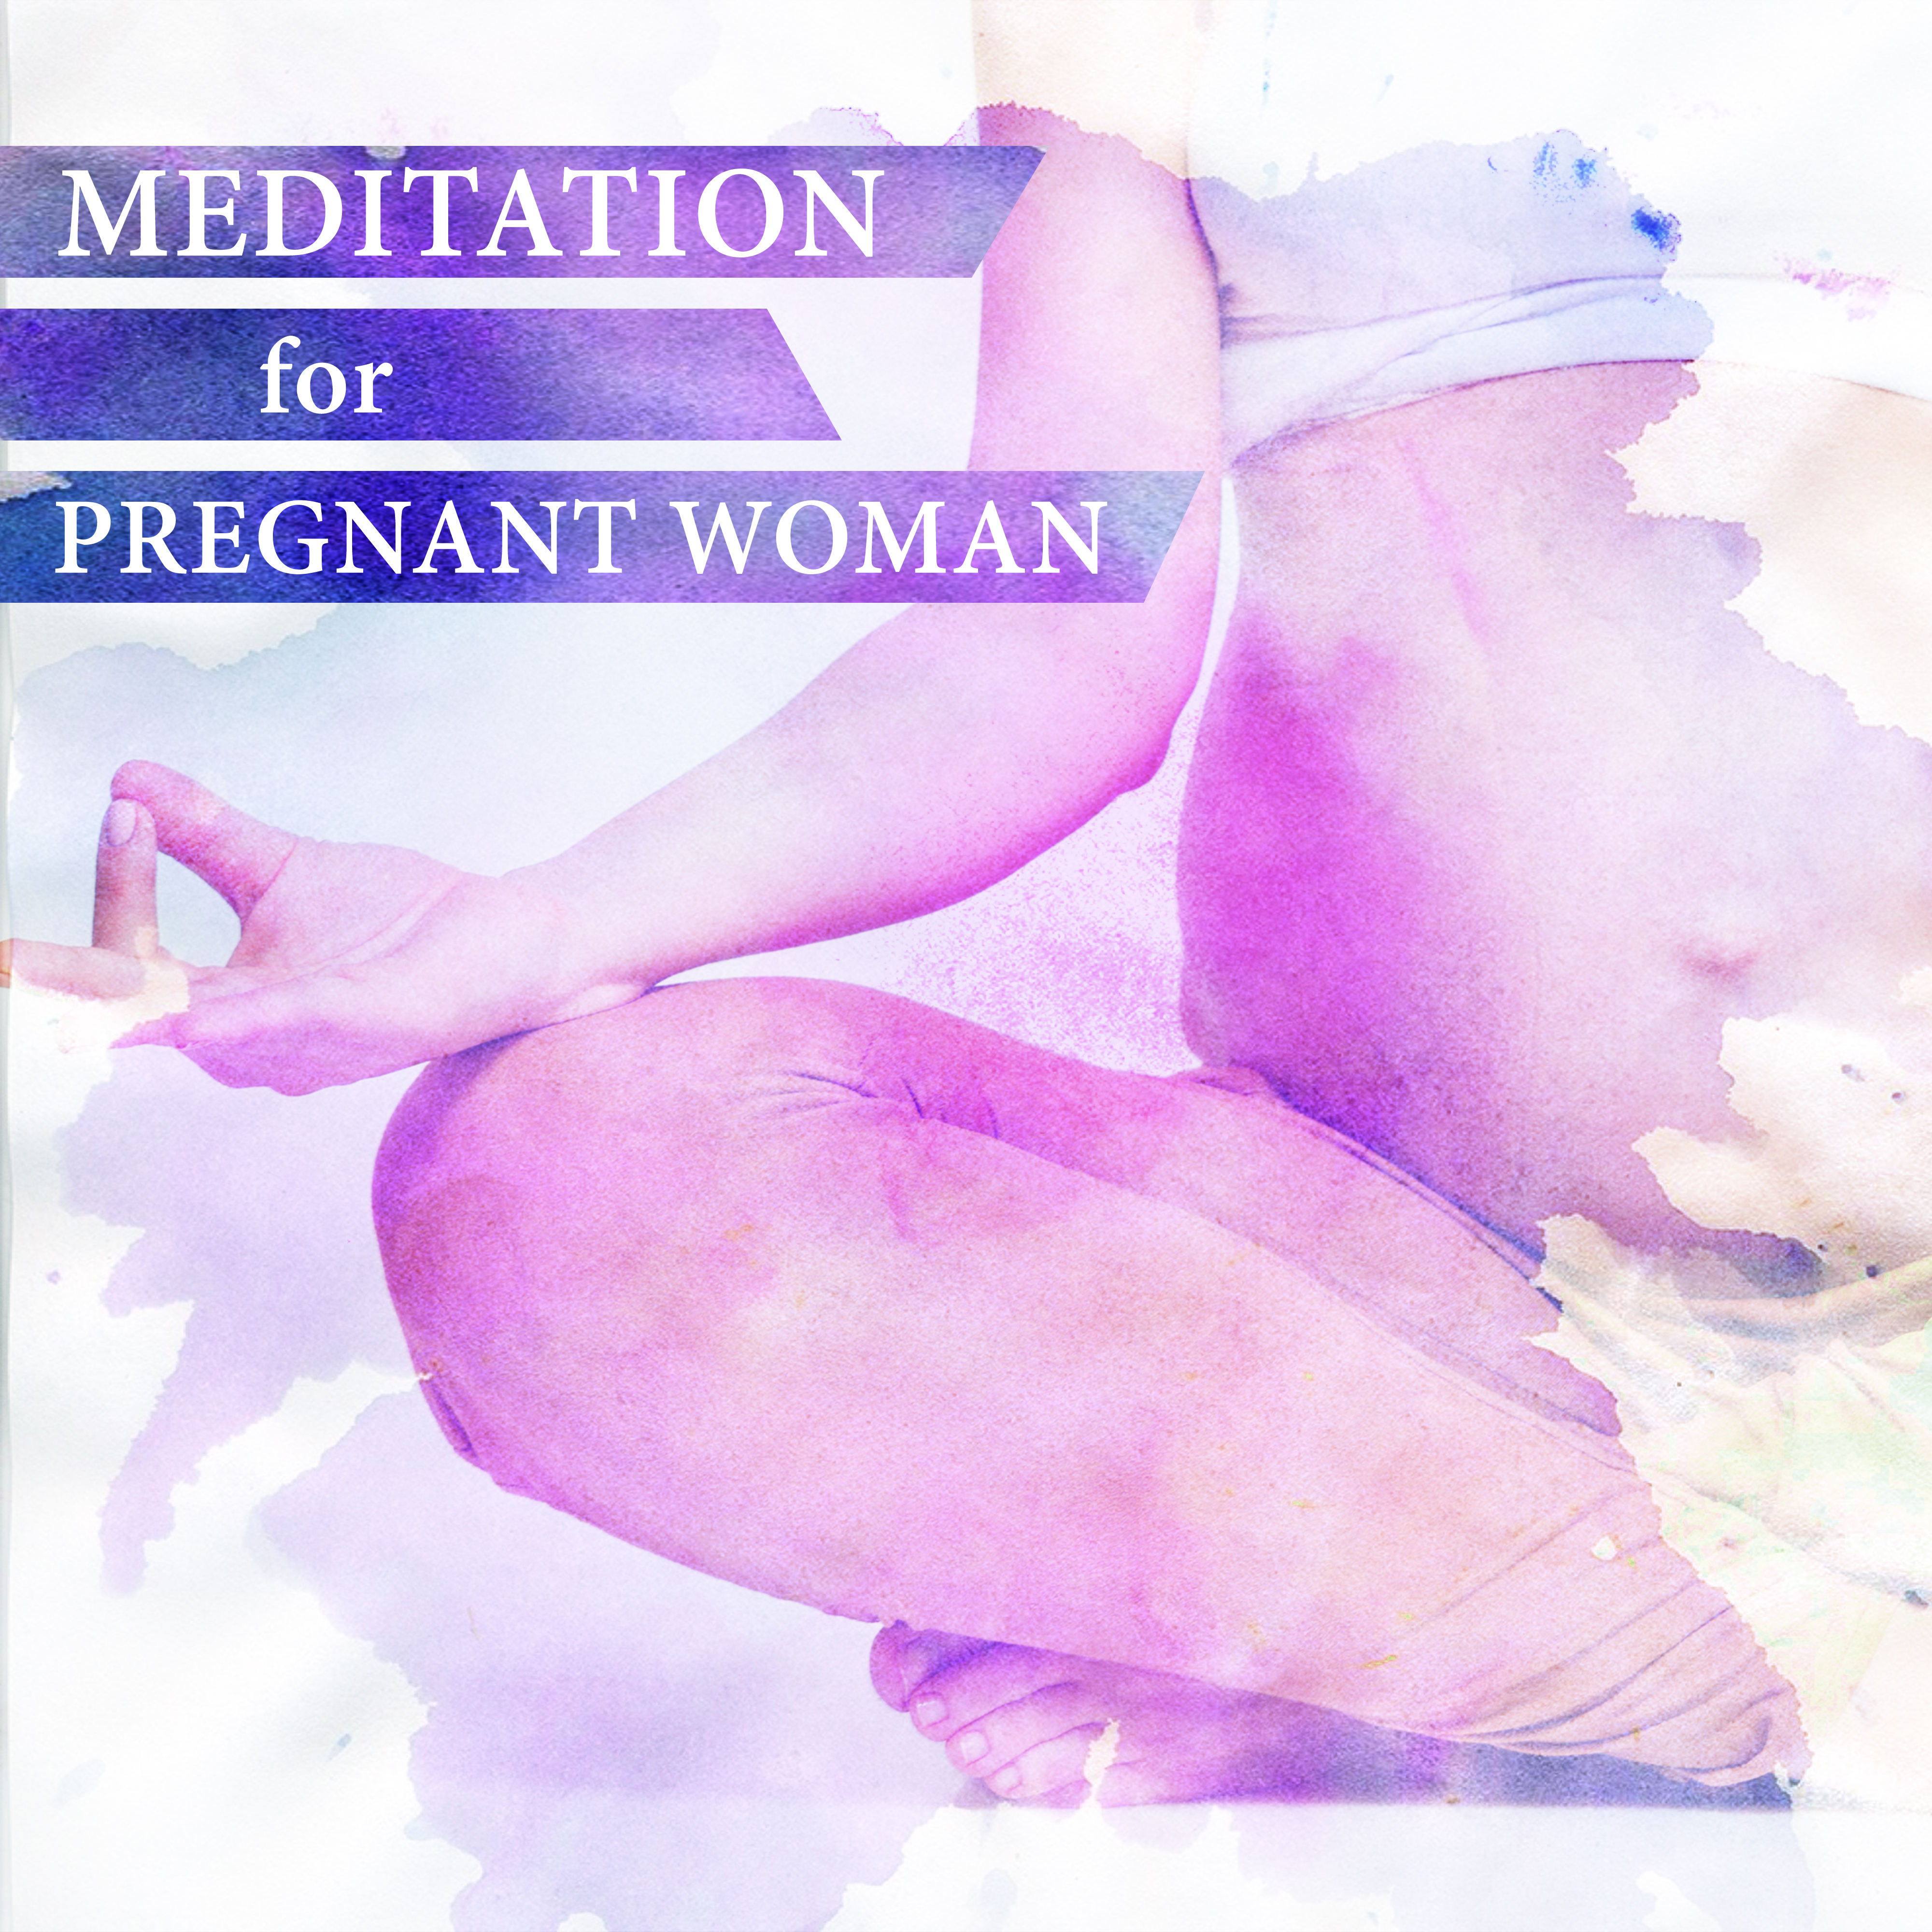 Meditation for Pregnant Woman  Soft Music for Relaxation, Pure Mind, Prenatal Yoga, Pregnancy Music, Calm Newborn